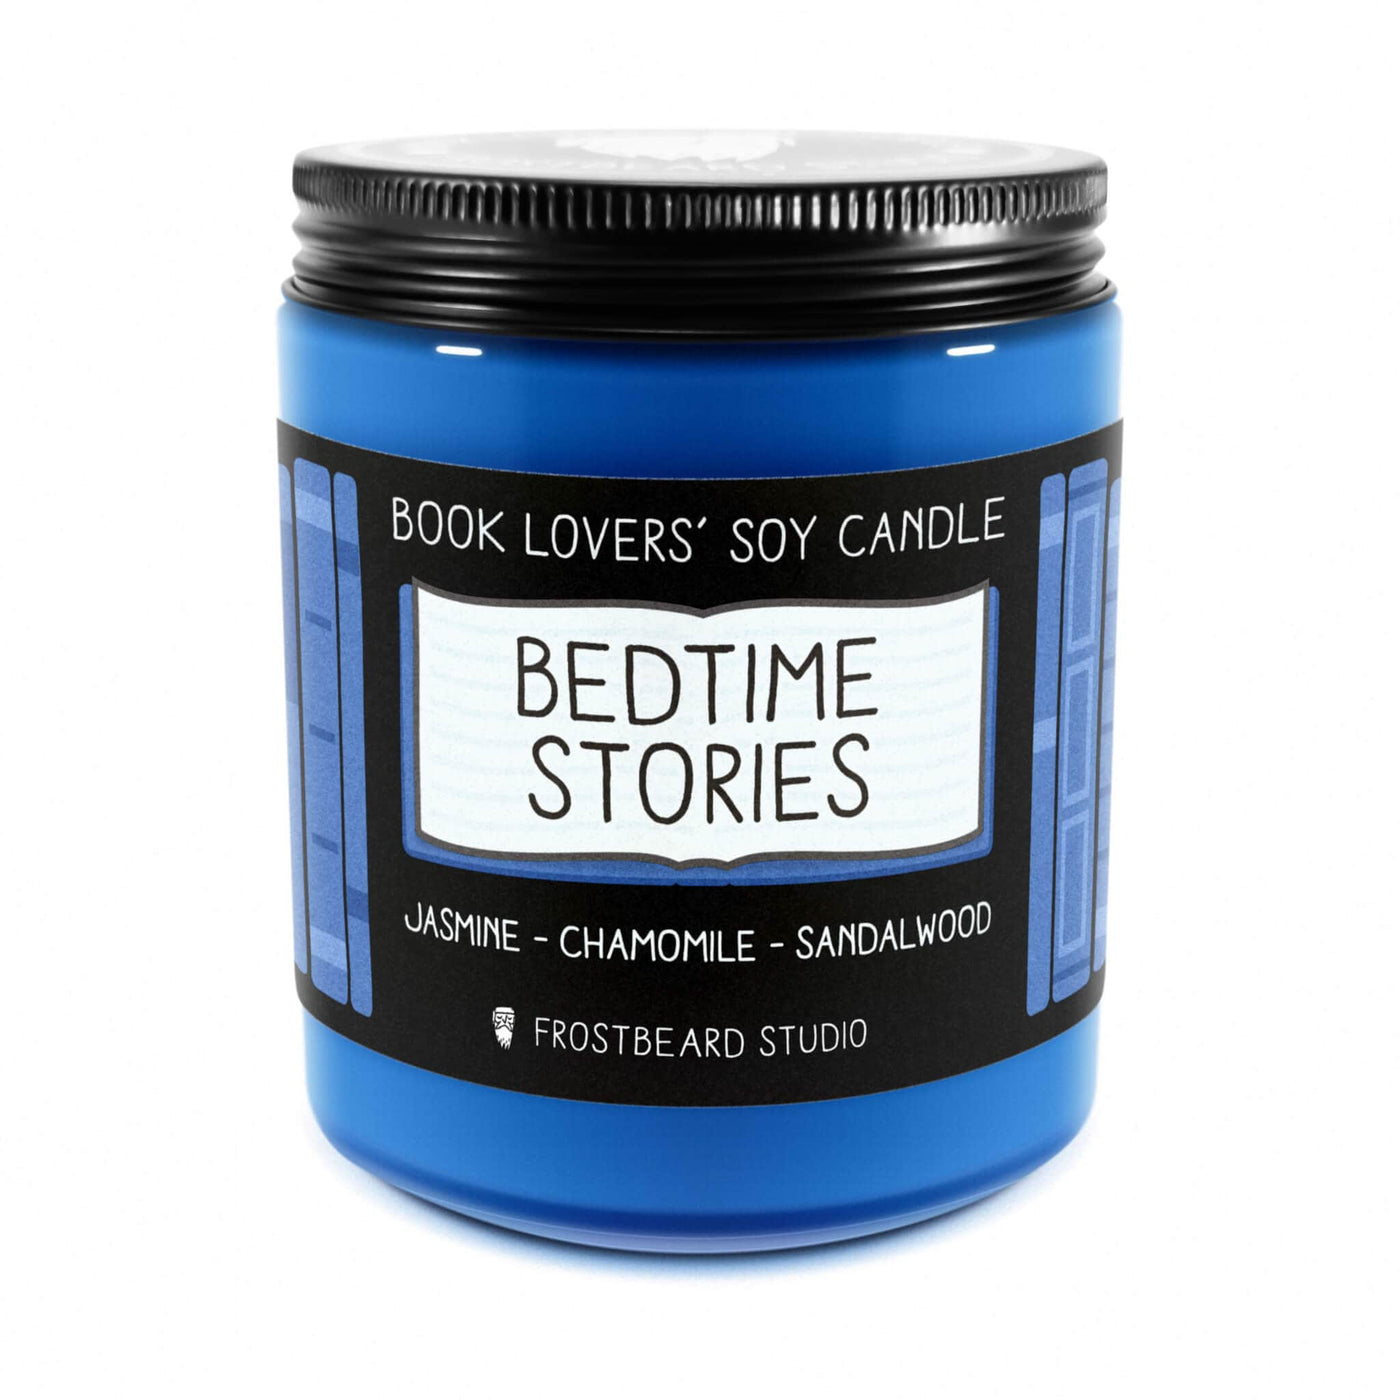 Bedtime Stories - 8 oz Jar - Book Lovers' Soy Candle - Frostbeard Studio